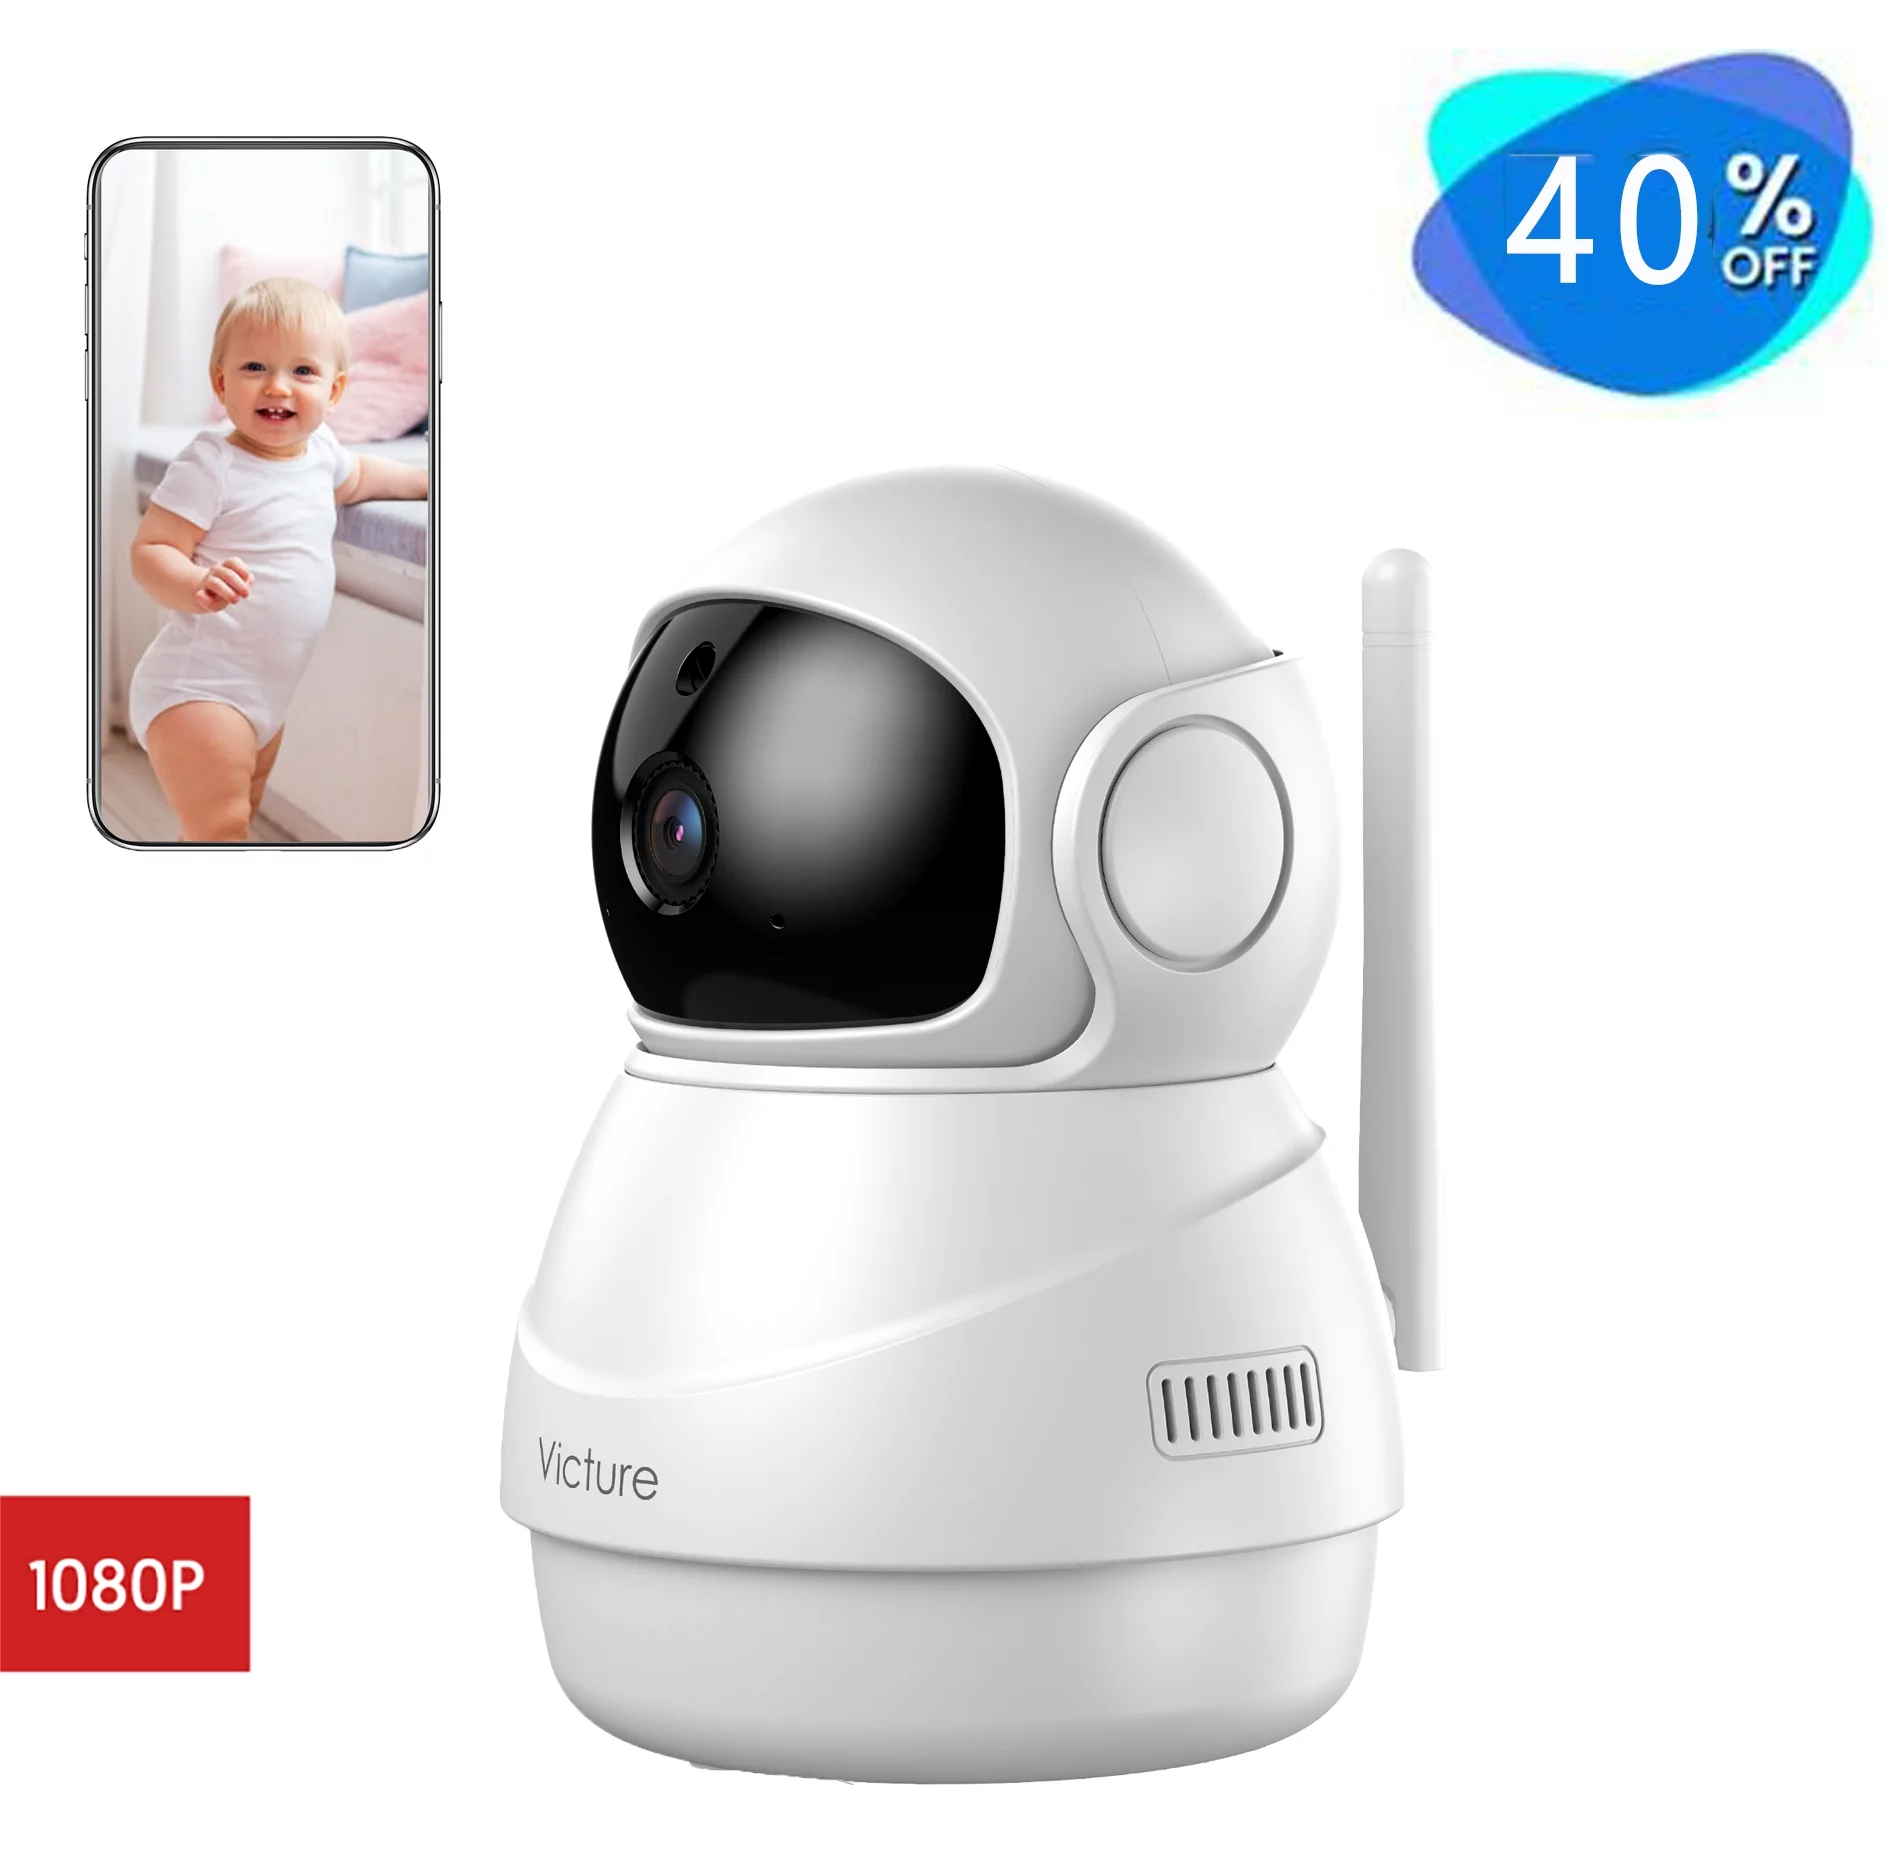 Victure PC530 Baby Monitor,1080P Multi-Purpose Surveillance Camera with Sound / Motion Detection,Motion Tracking and Night Vision